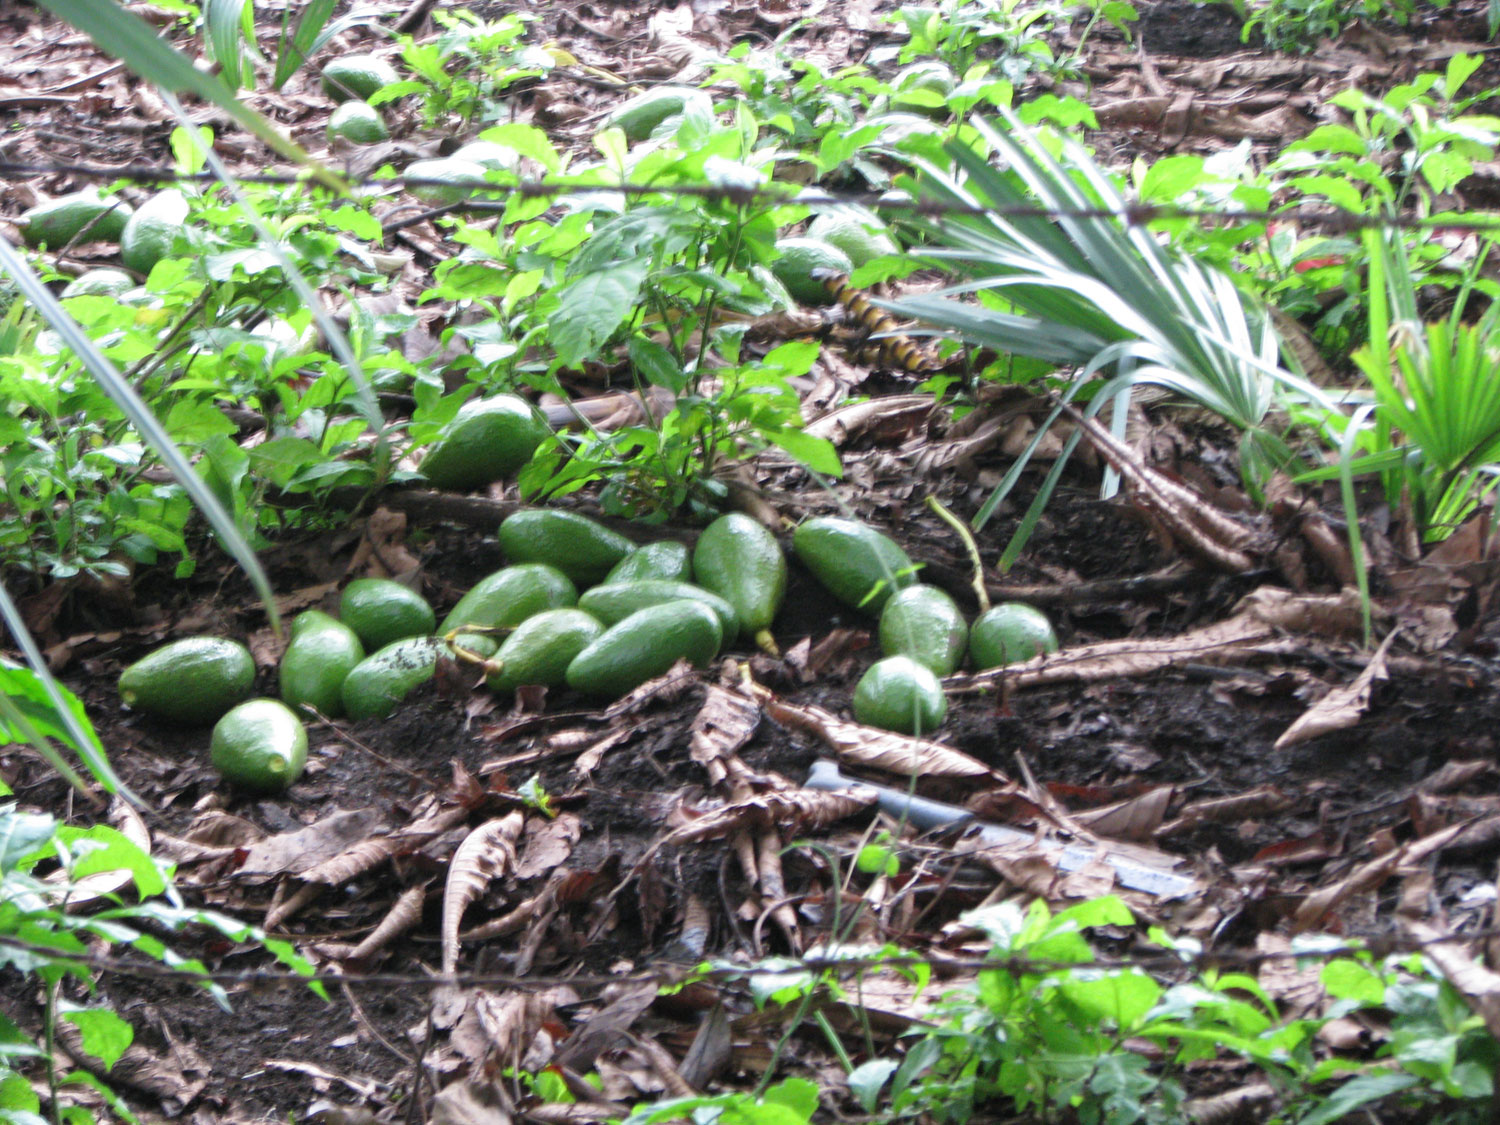 The harvested avacados